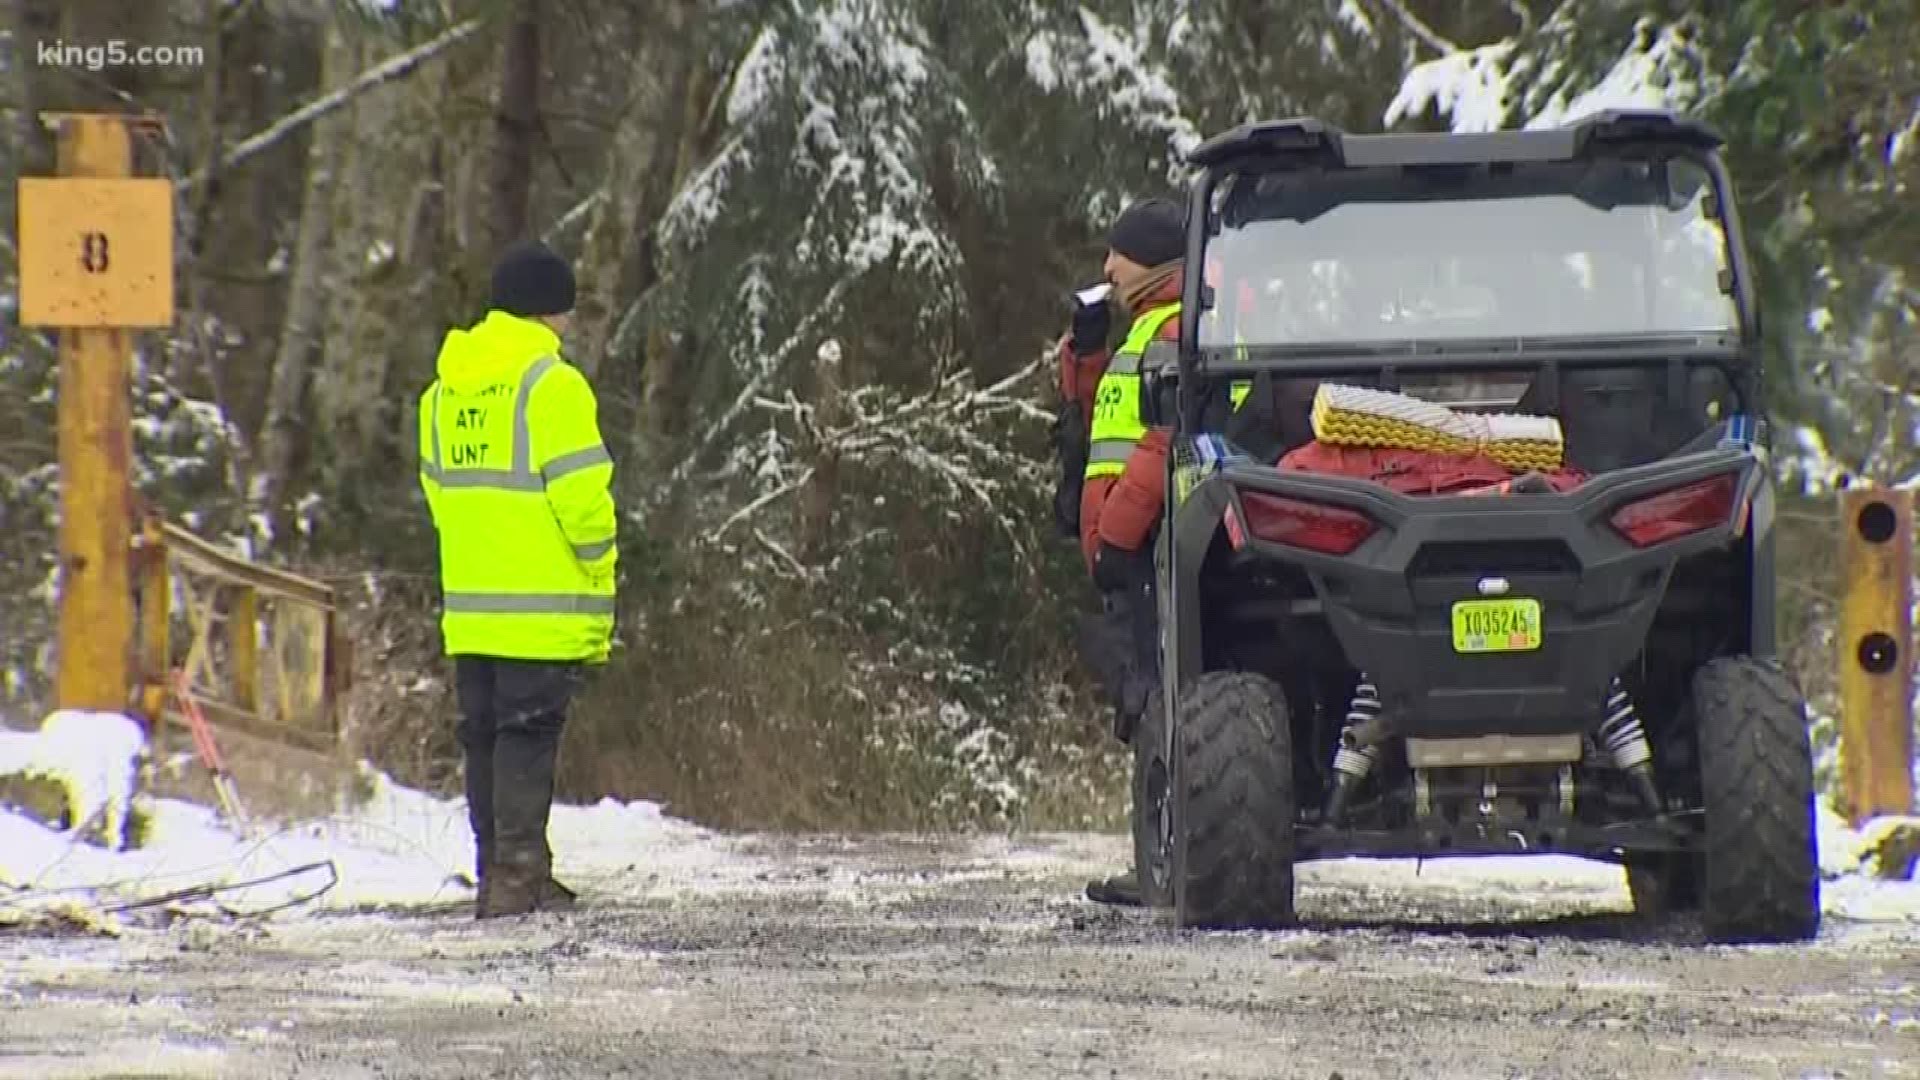 and today crews found two bodies in the Mud Mountain Dam Area, just east of Enumclaw.